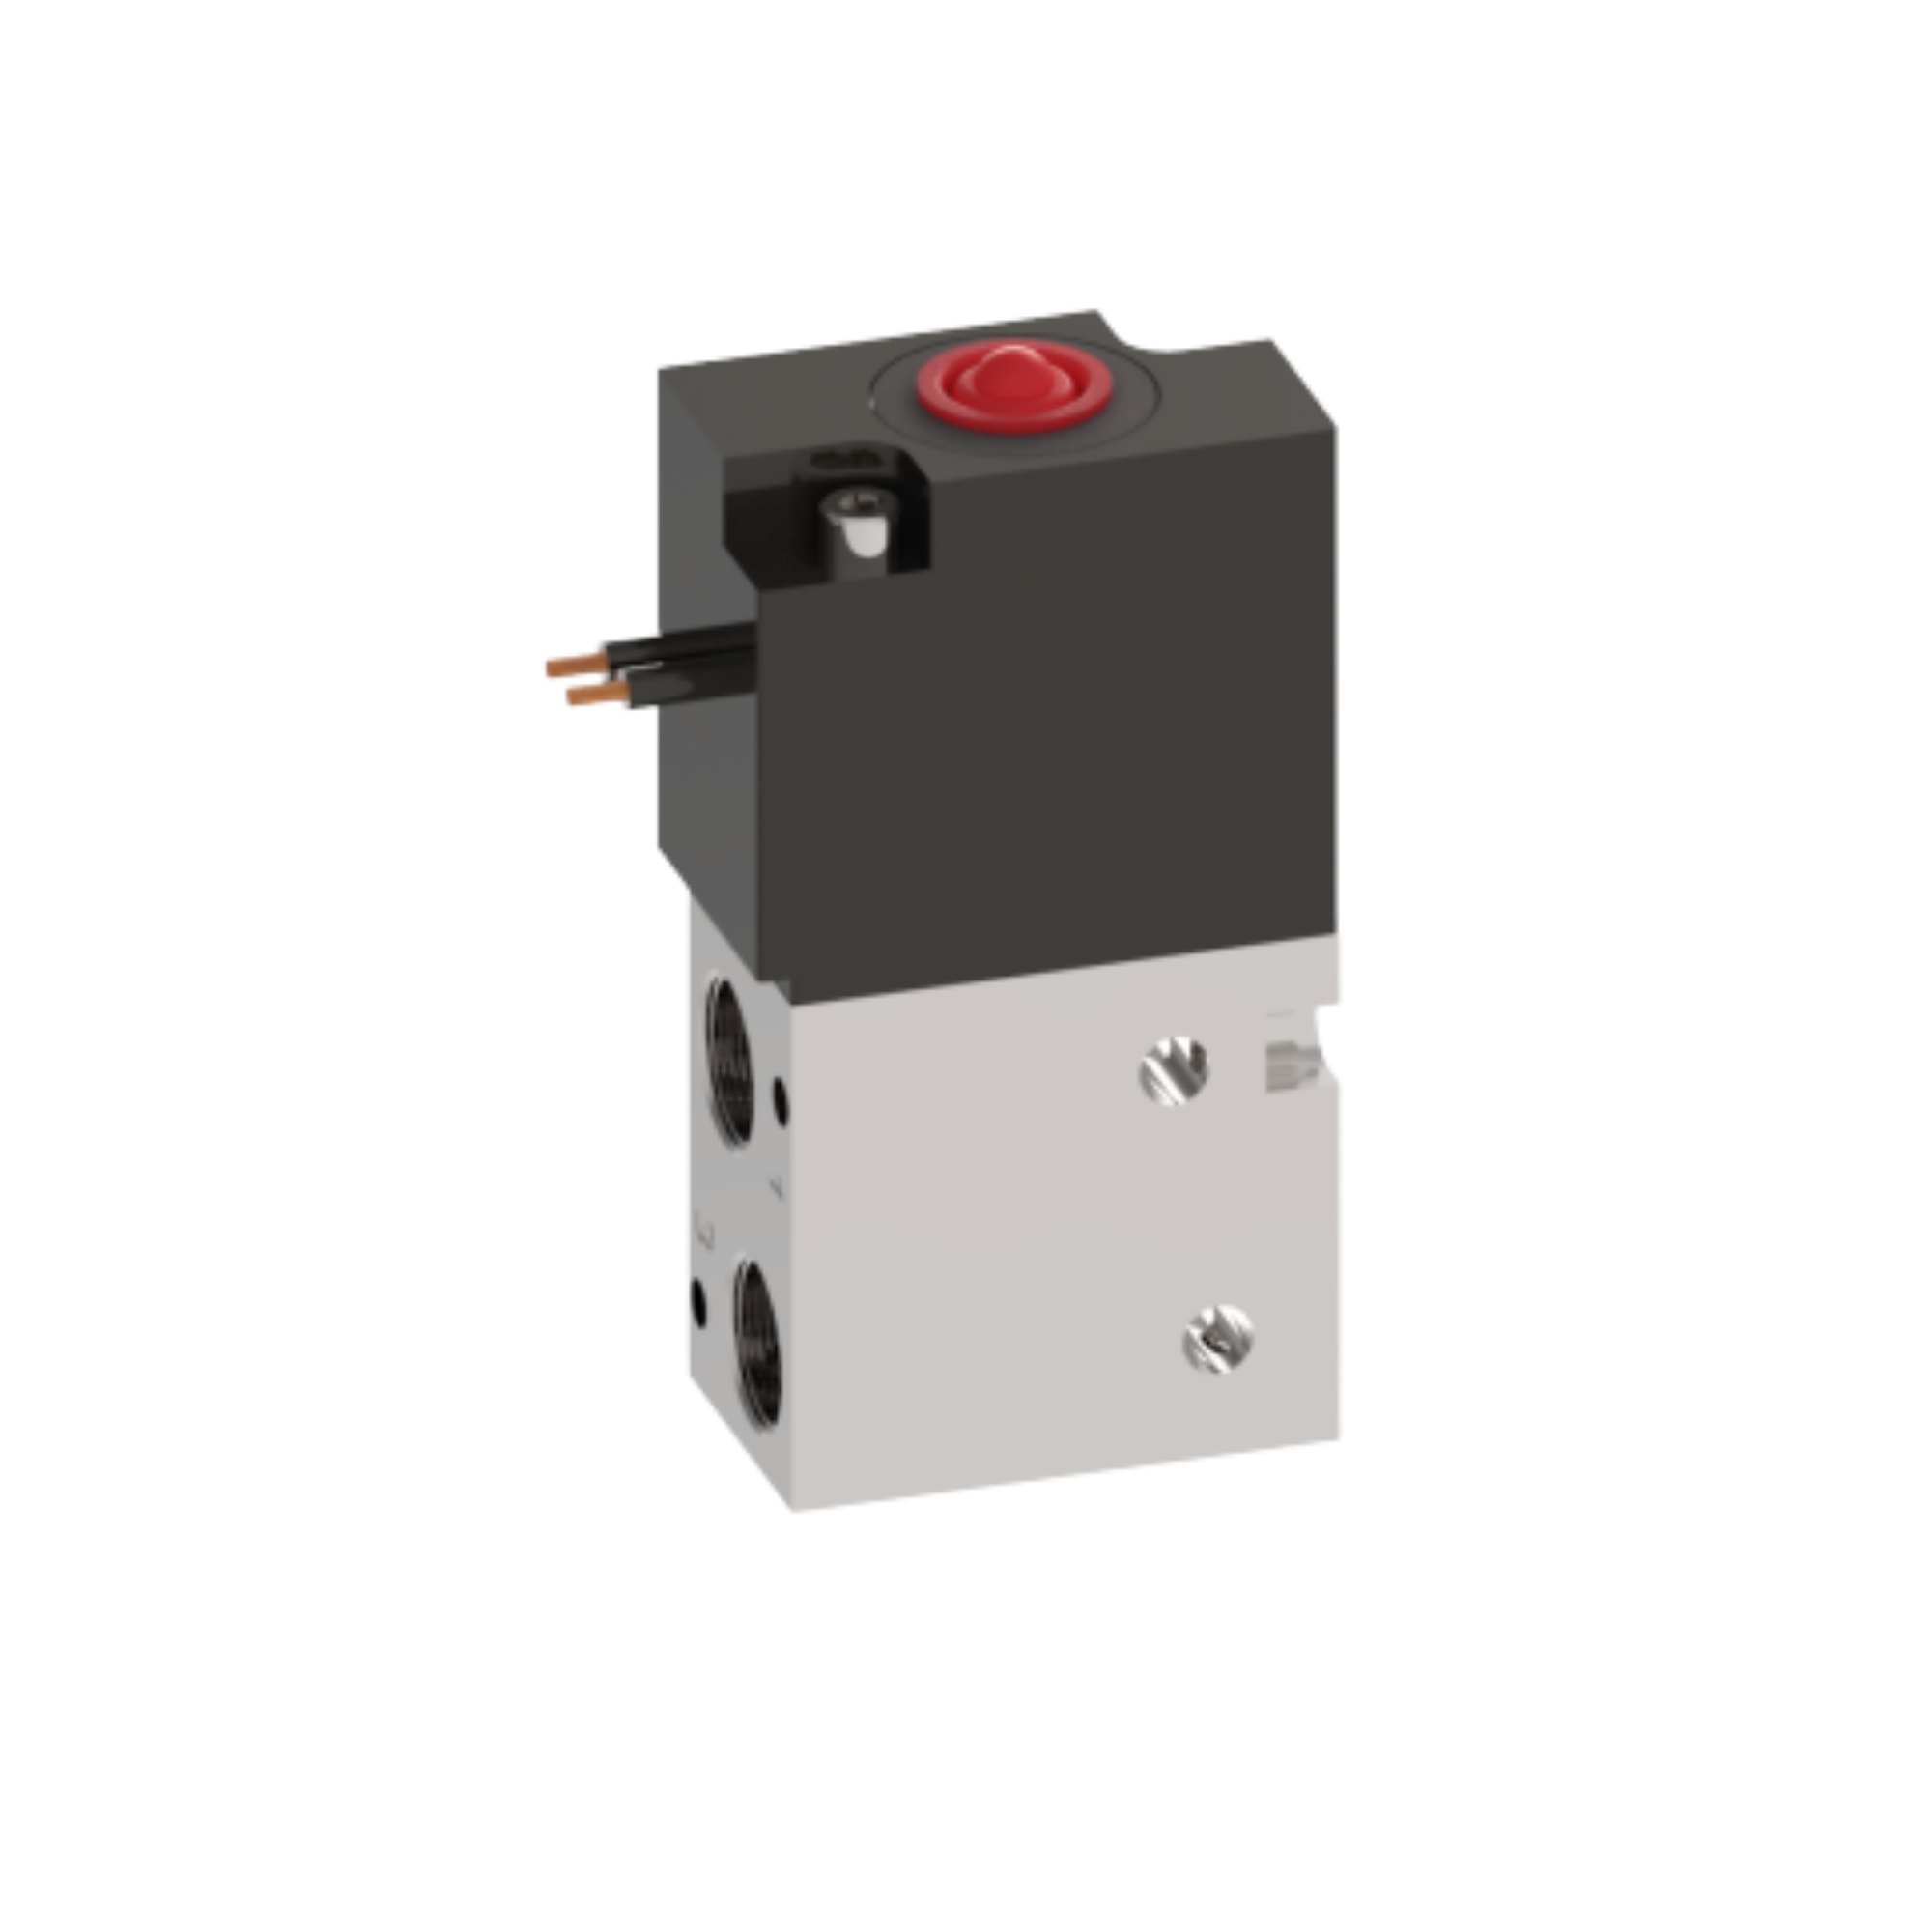 compact upright rectangular solenoid valve with two ports on the bottom left and an electrical lead at the top left